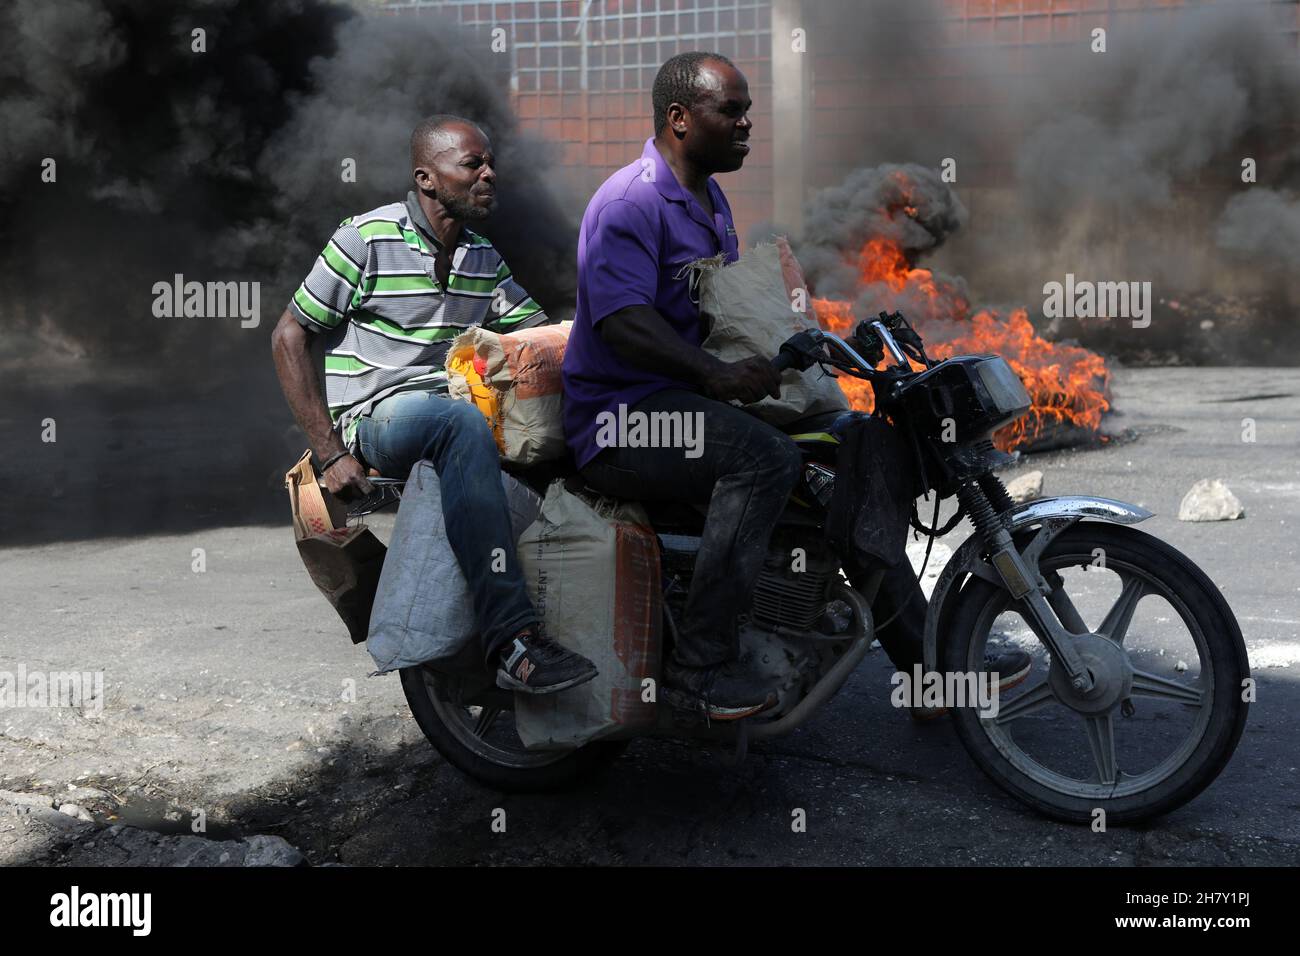 Two men on a motorcylce ride past a burning street baricade during demonstrations against widespread kidnappings, in Port-au-Prince, Haiti November 25, 2021. REUTERS/Ralph Tedy Erol Stock Photo